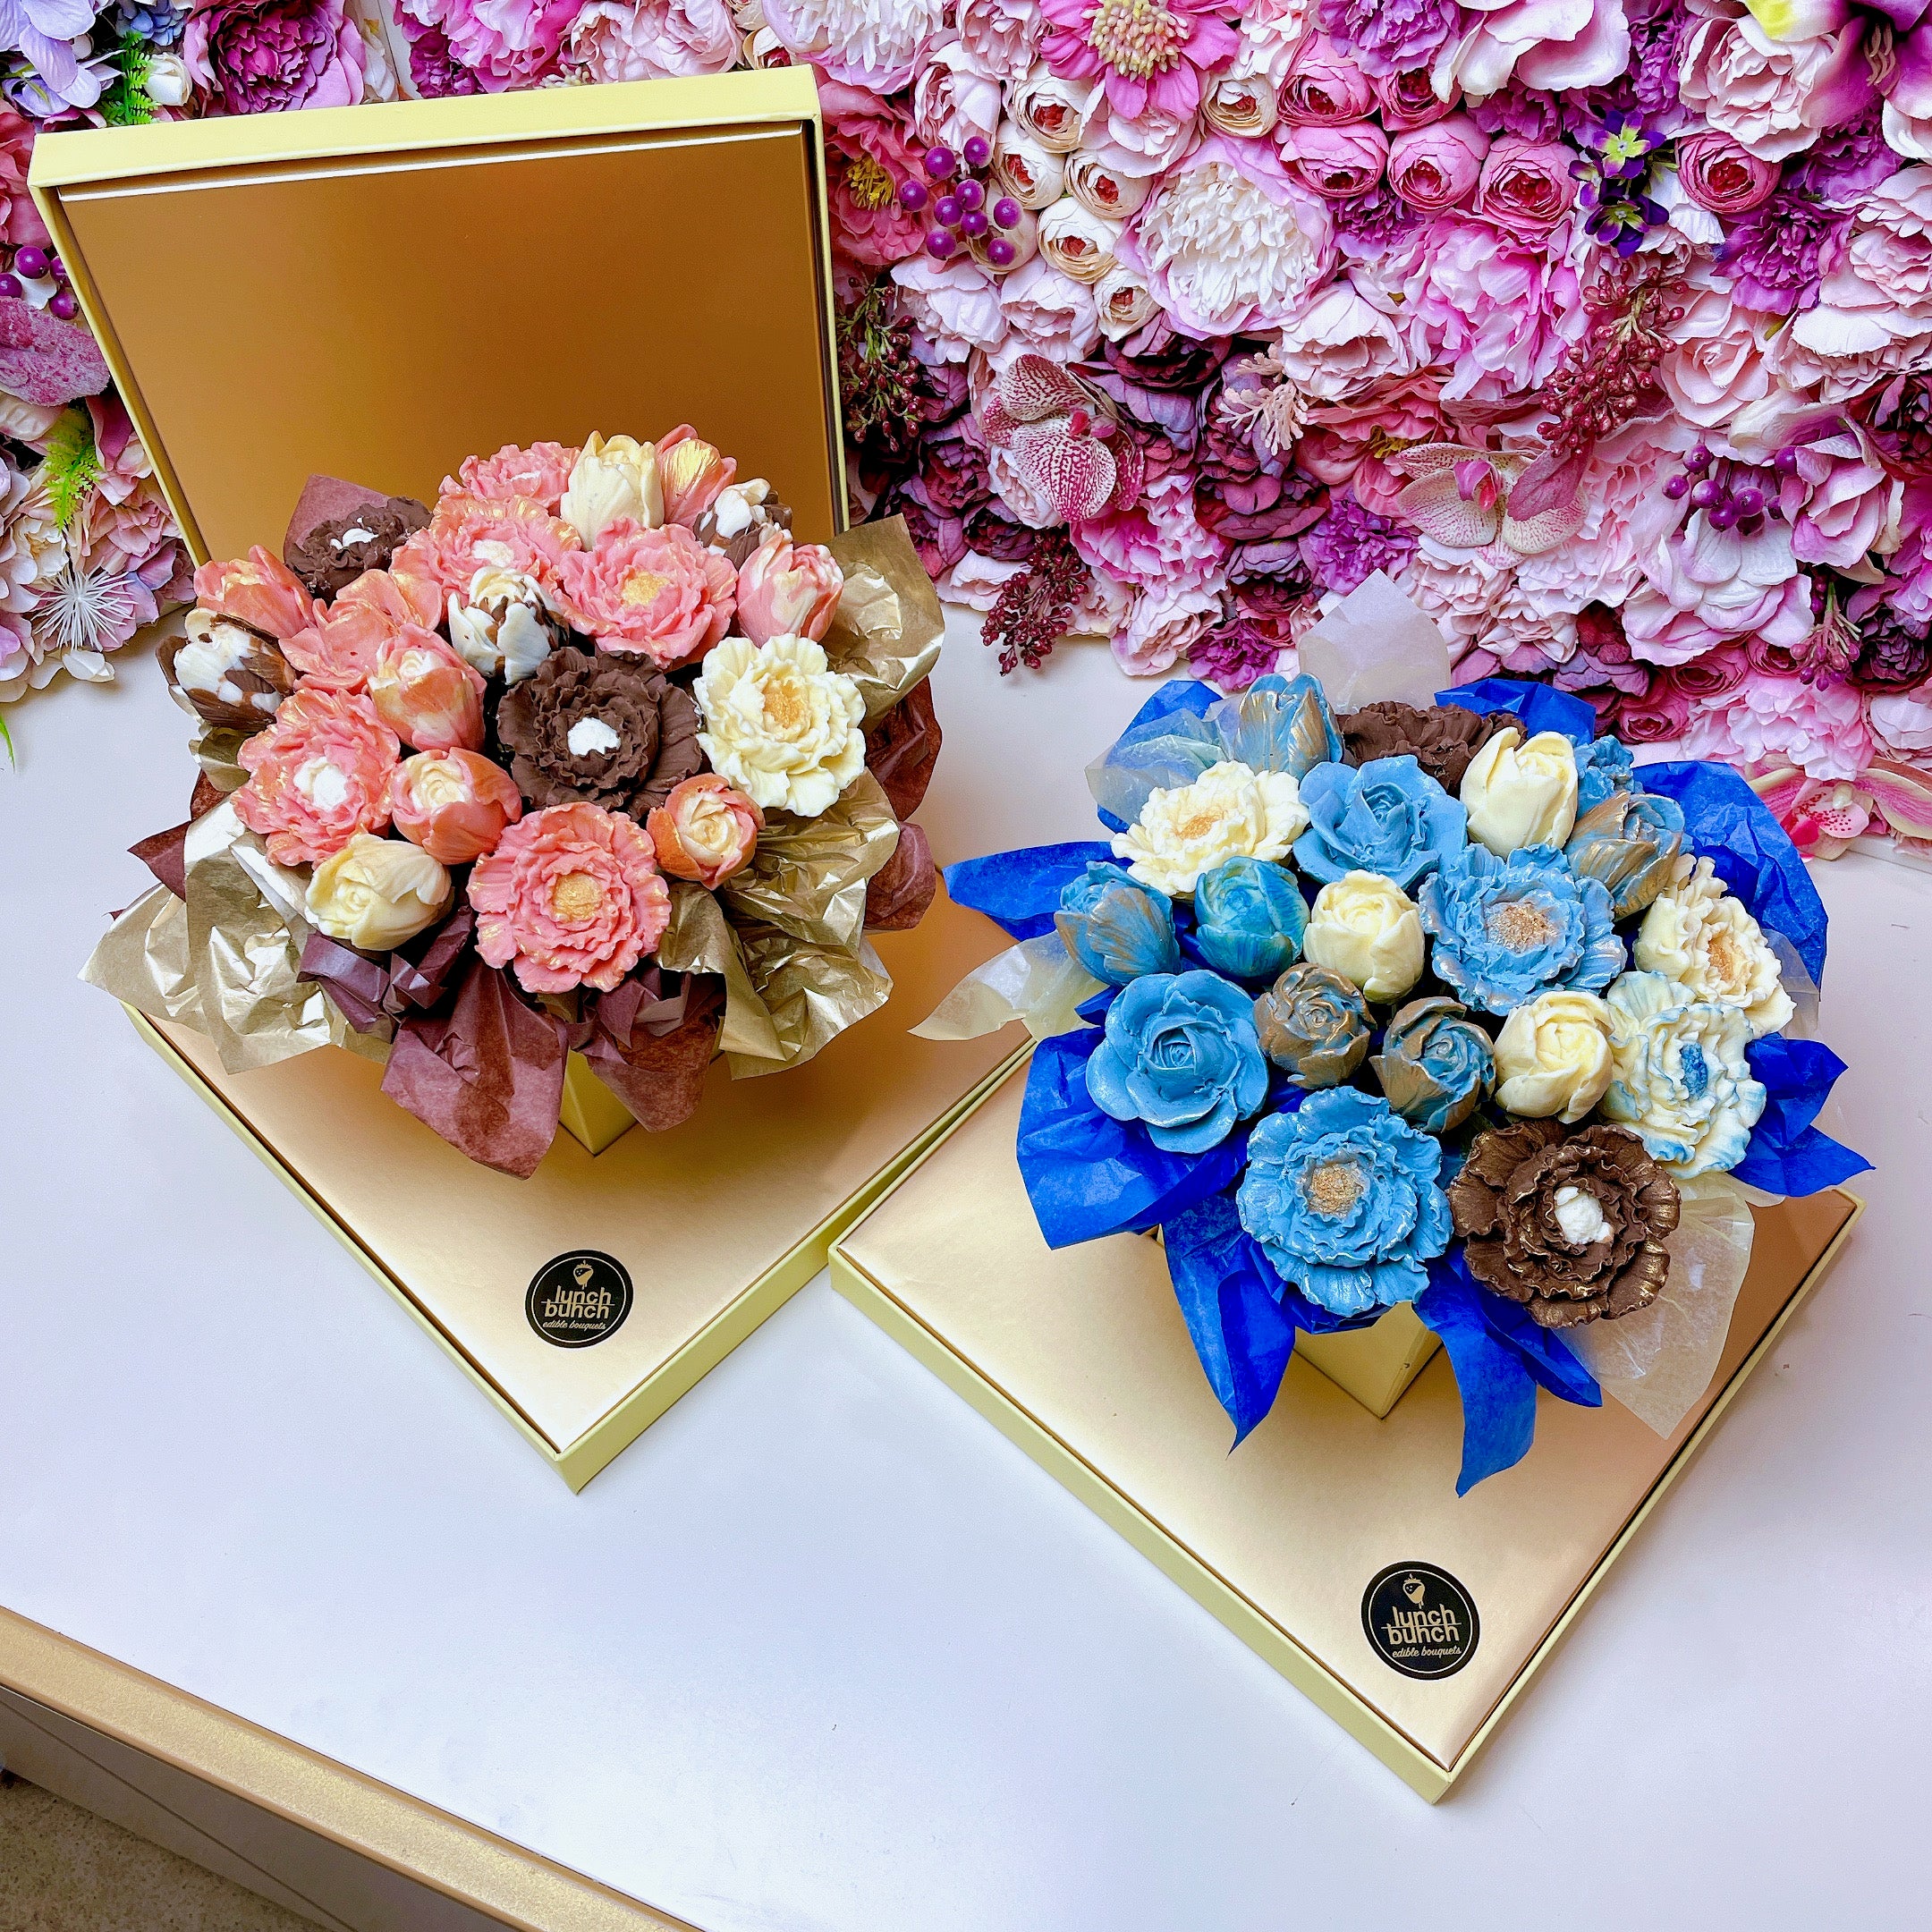 Chocolate blooms Bouquet, chocolate flowers bouquet, blue flowers gift lolly table display newborn boy gifts